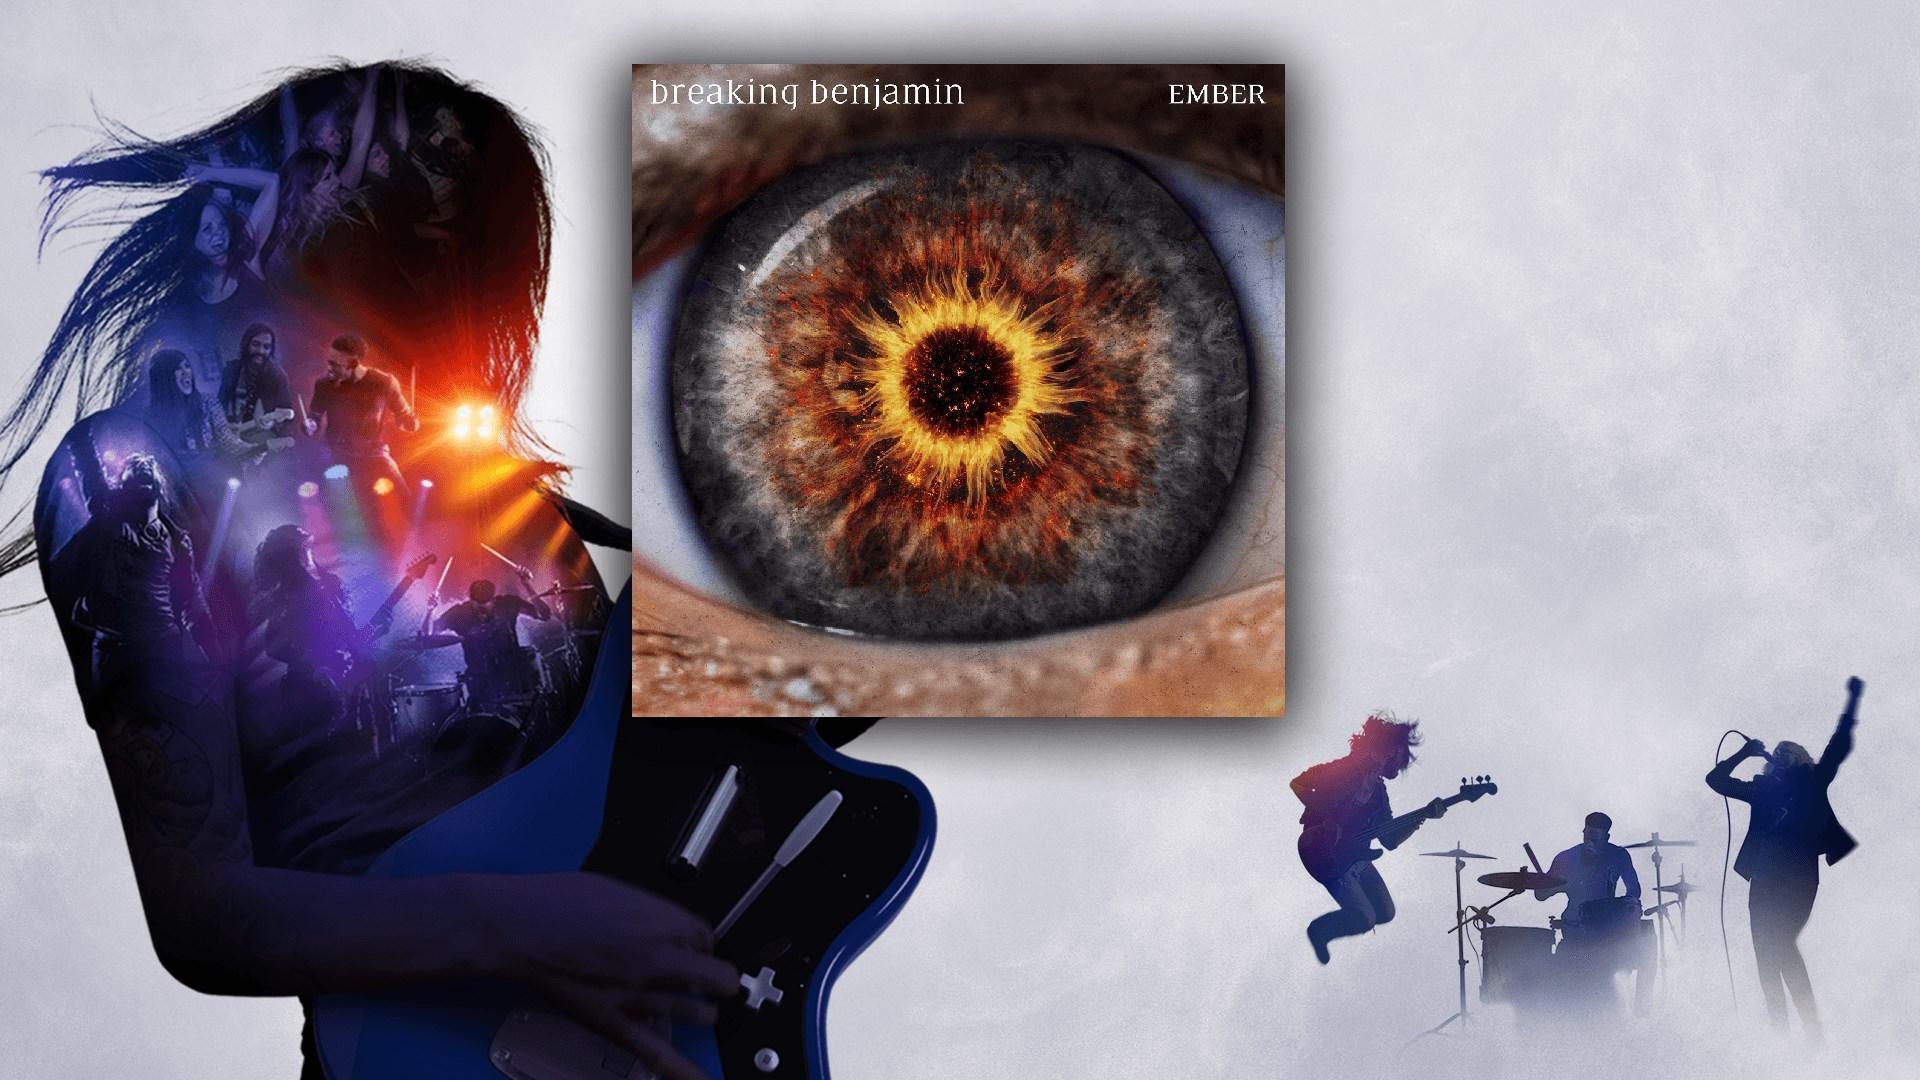 Breaking Benjamin lead the way in the latest Rock Band 4 DLC